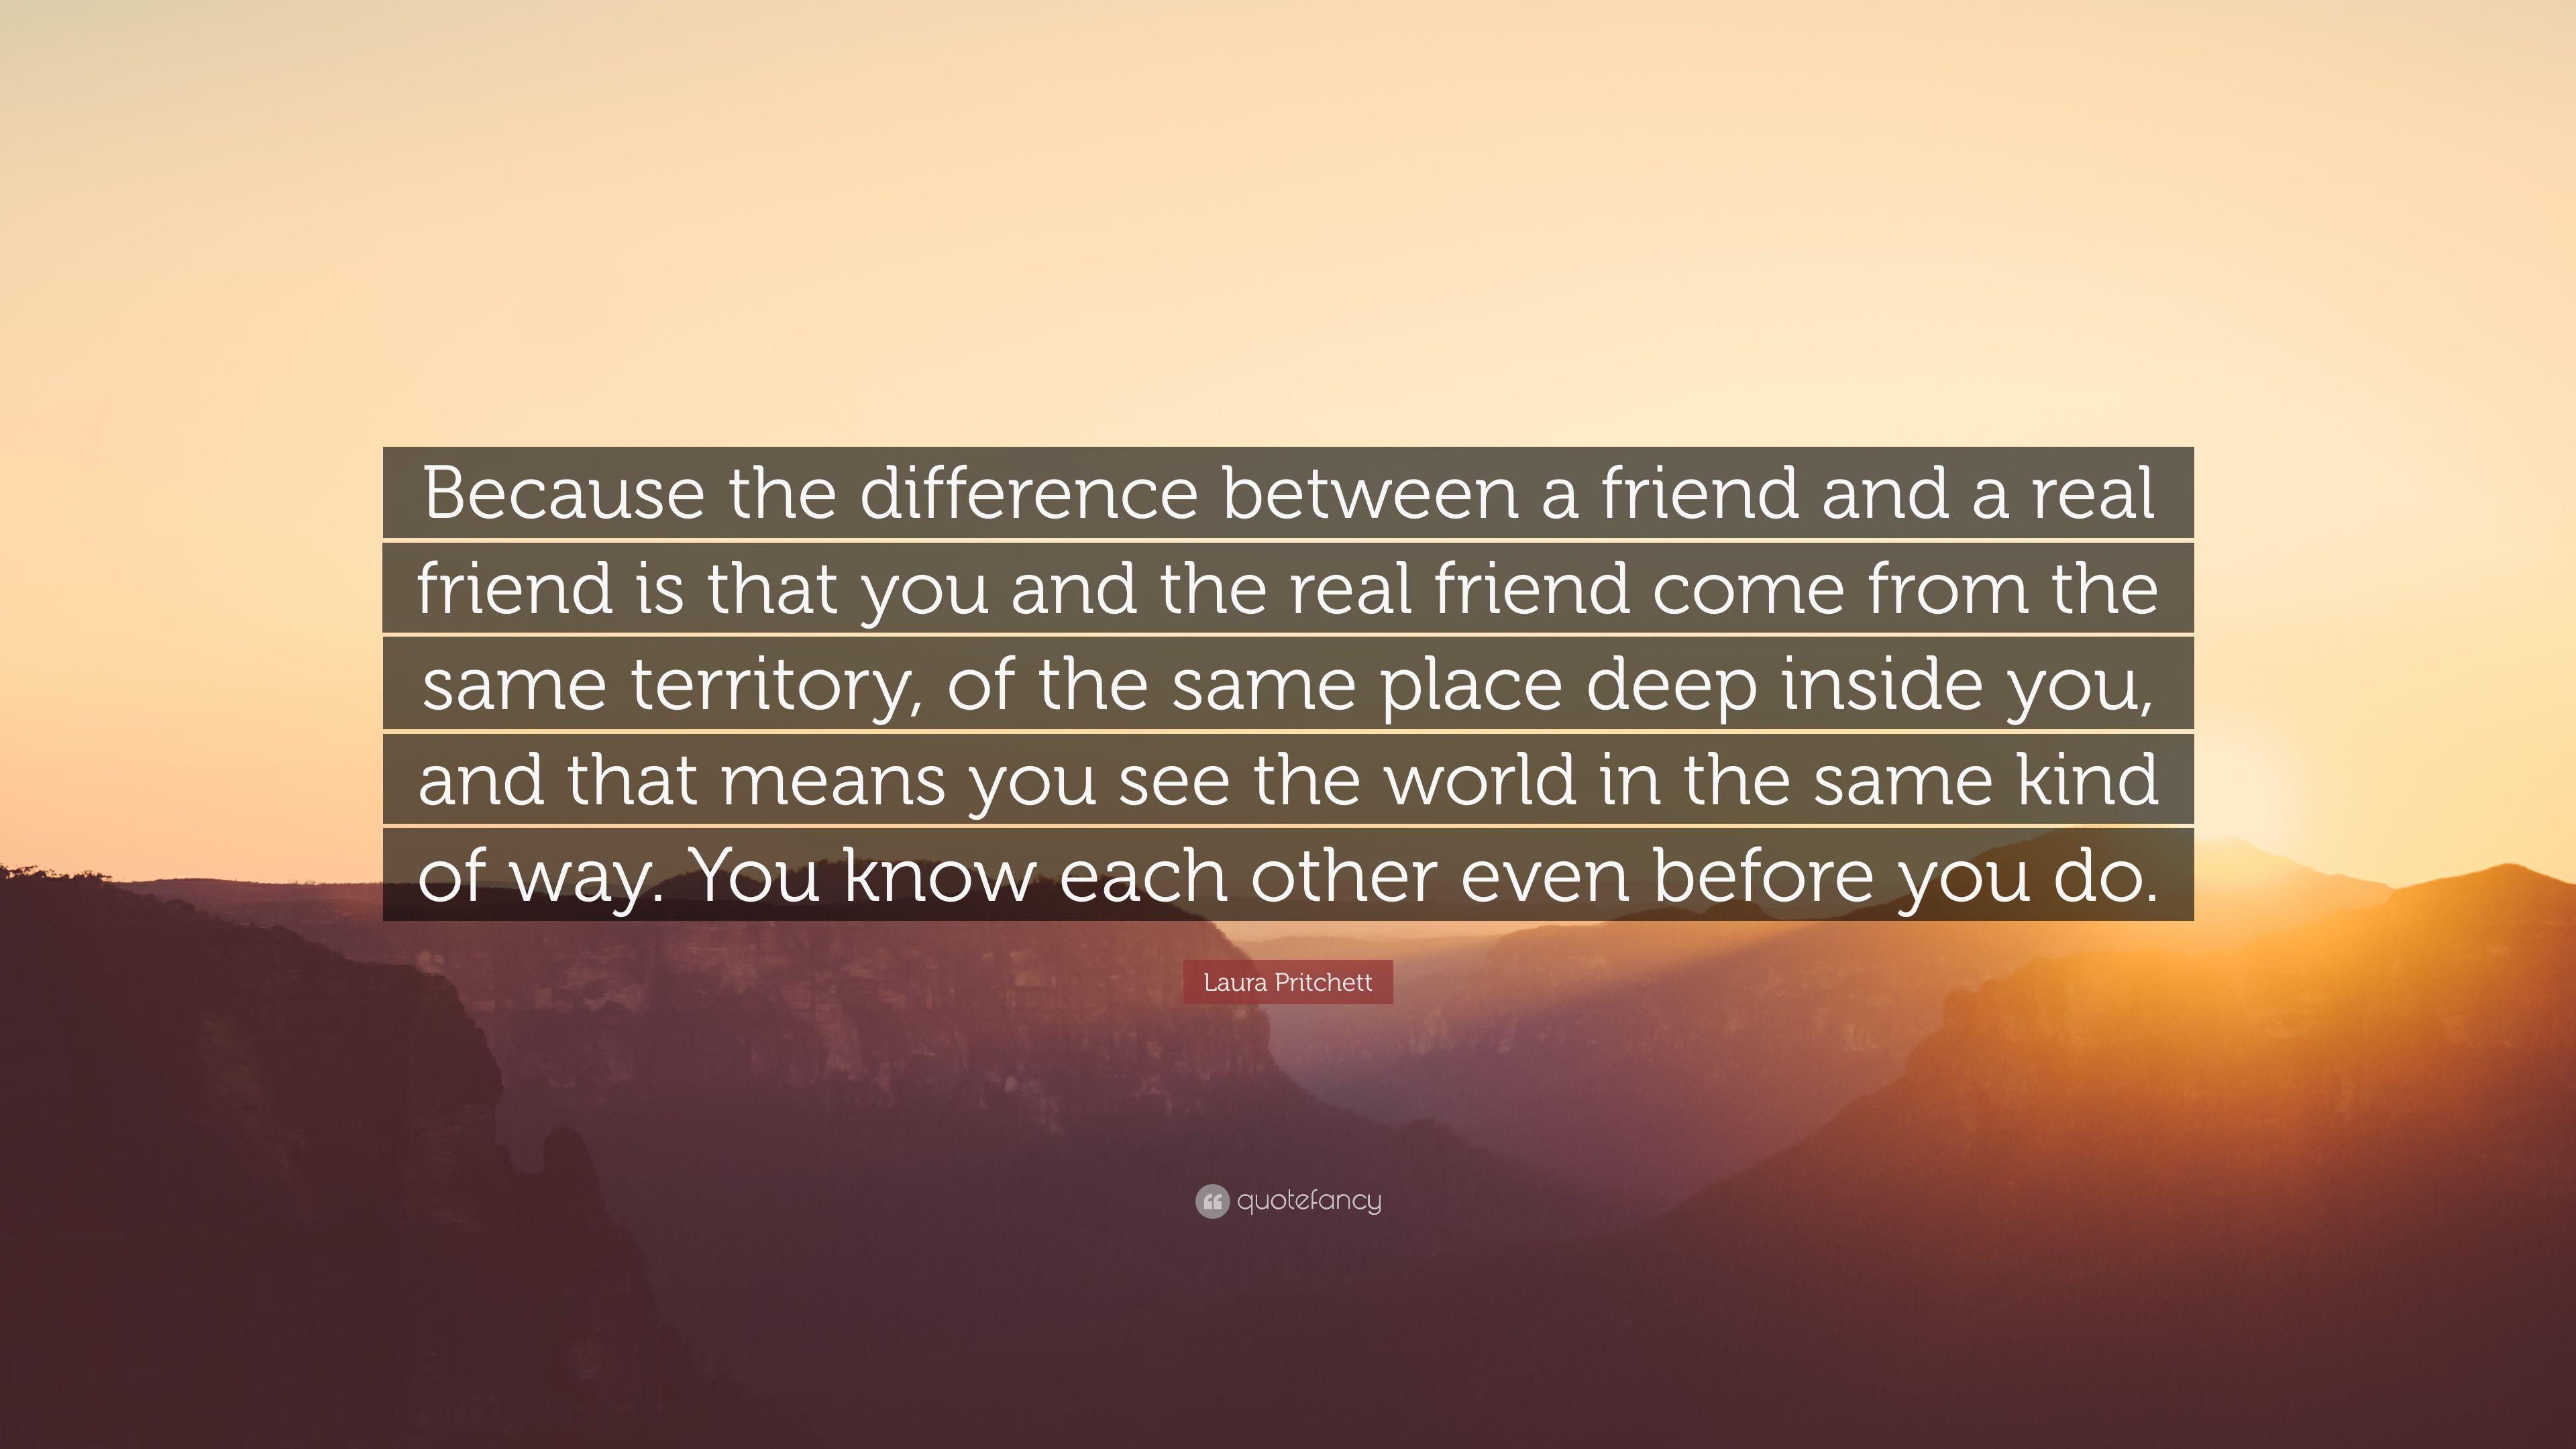 Laura Pritchett Quote: “Because the difference between a friend